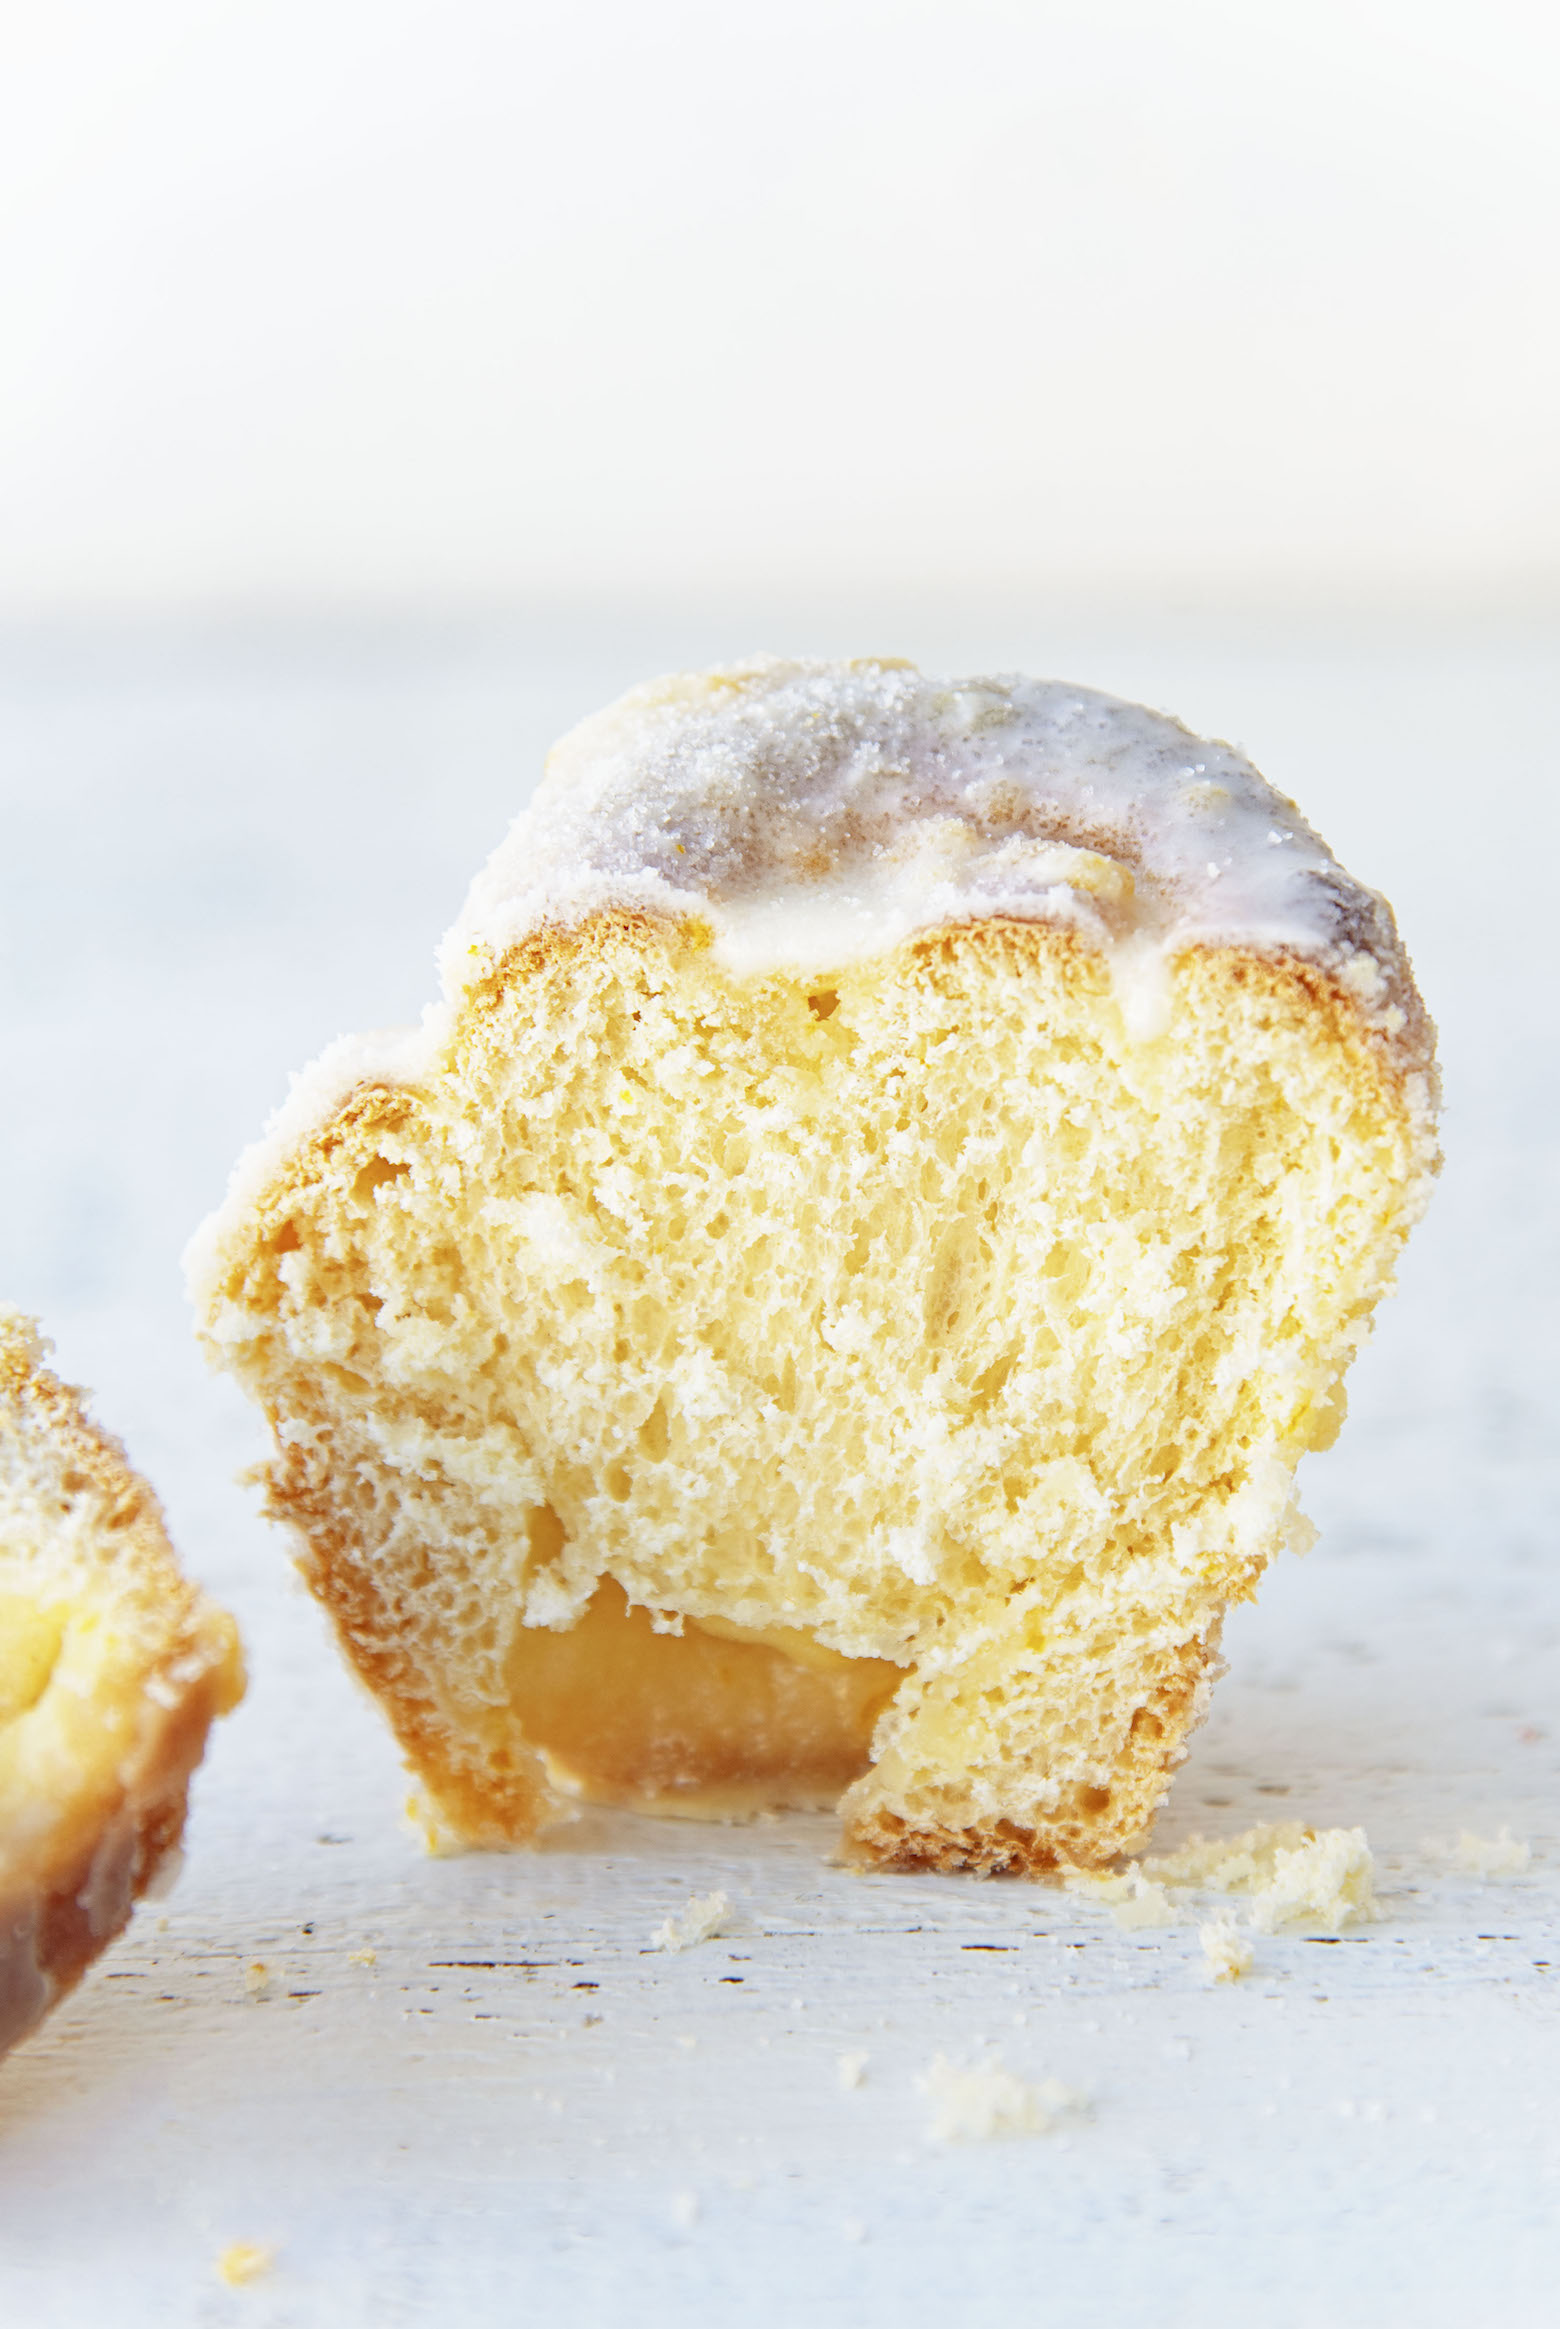 Slice of a single Mimosa Sugared Sweet Roll standing upright cut open.